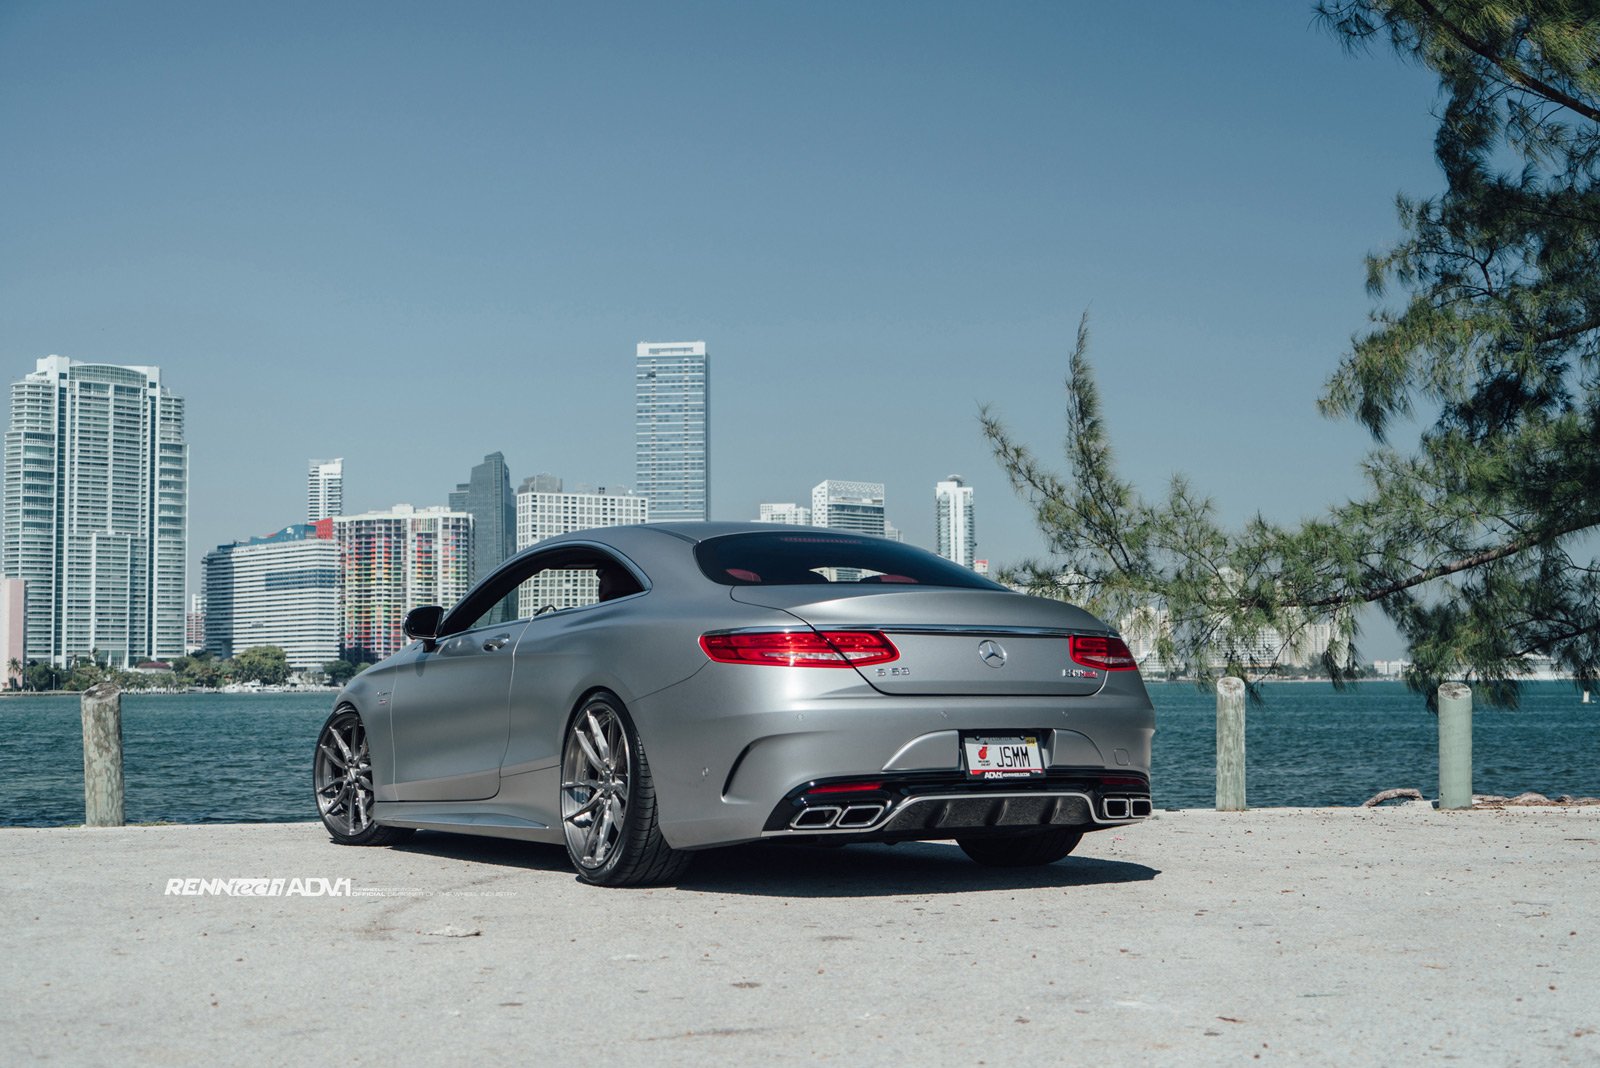 2015, Adv1, Cars, Coupe, Tuning, Wheels, Mercedes, S63, Amg, Renntech Wallpaper